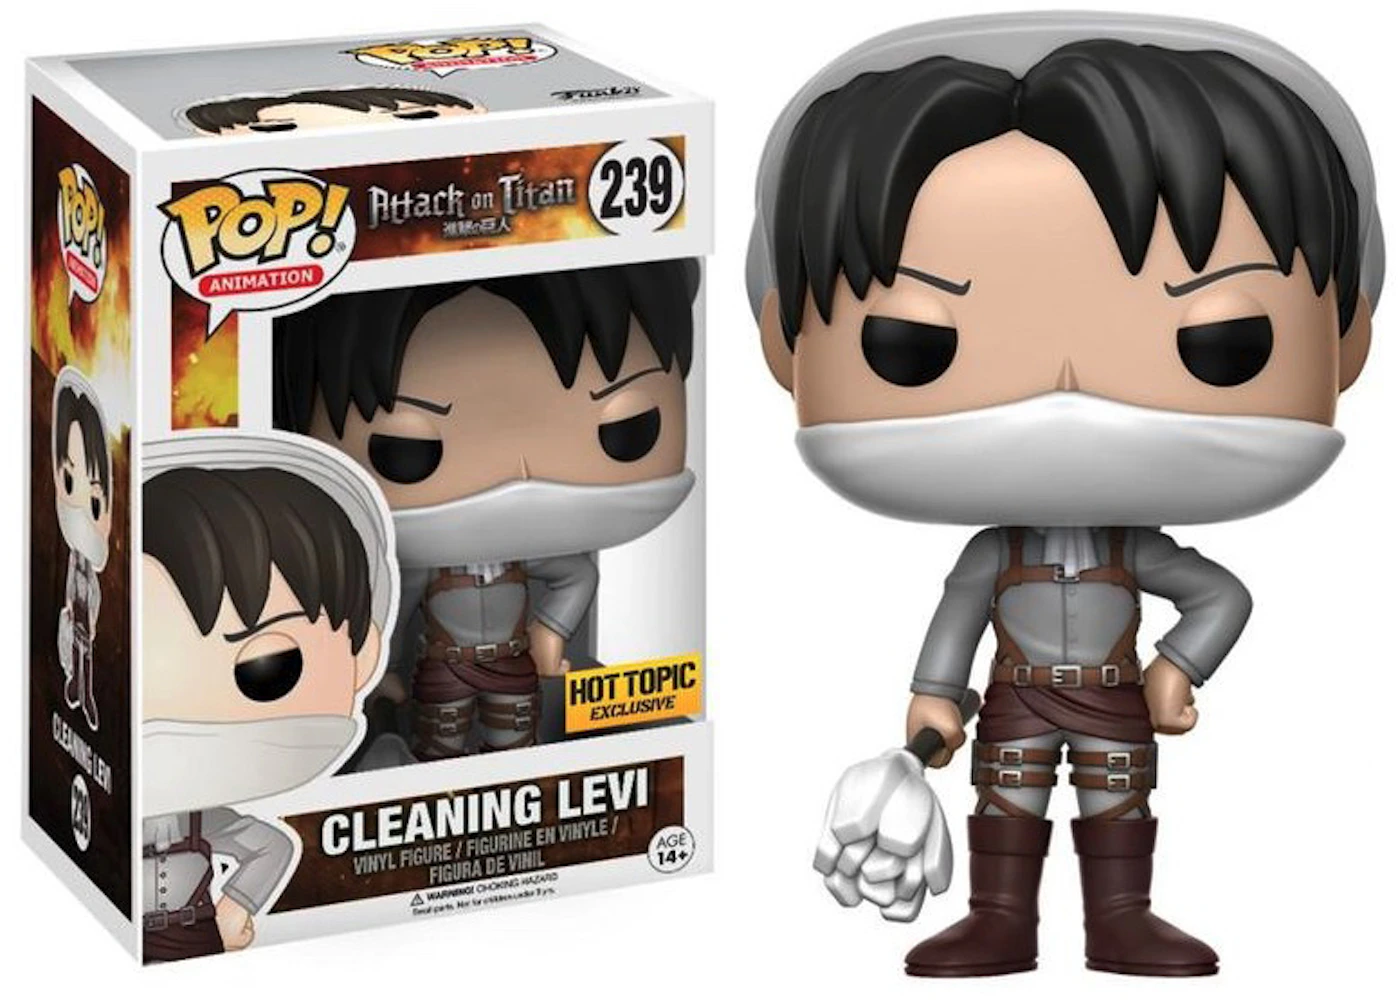 Funko Pop! Animation Attack on Titan Cleaning Levi Hot Topic